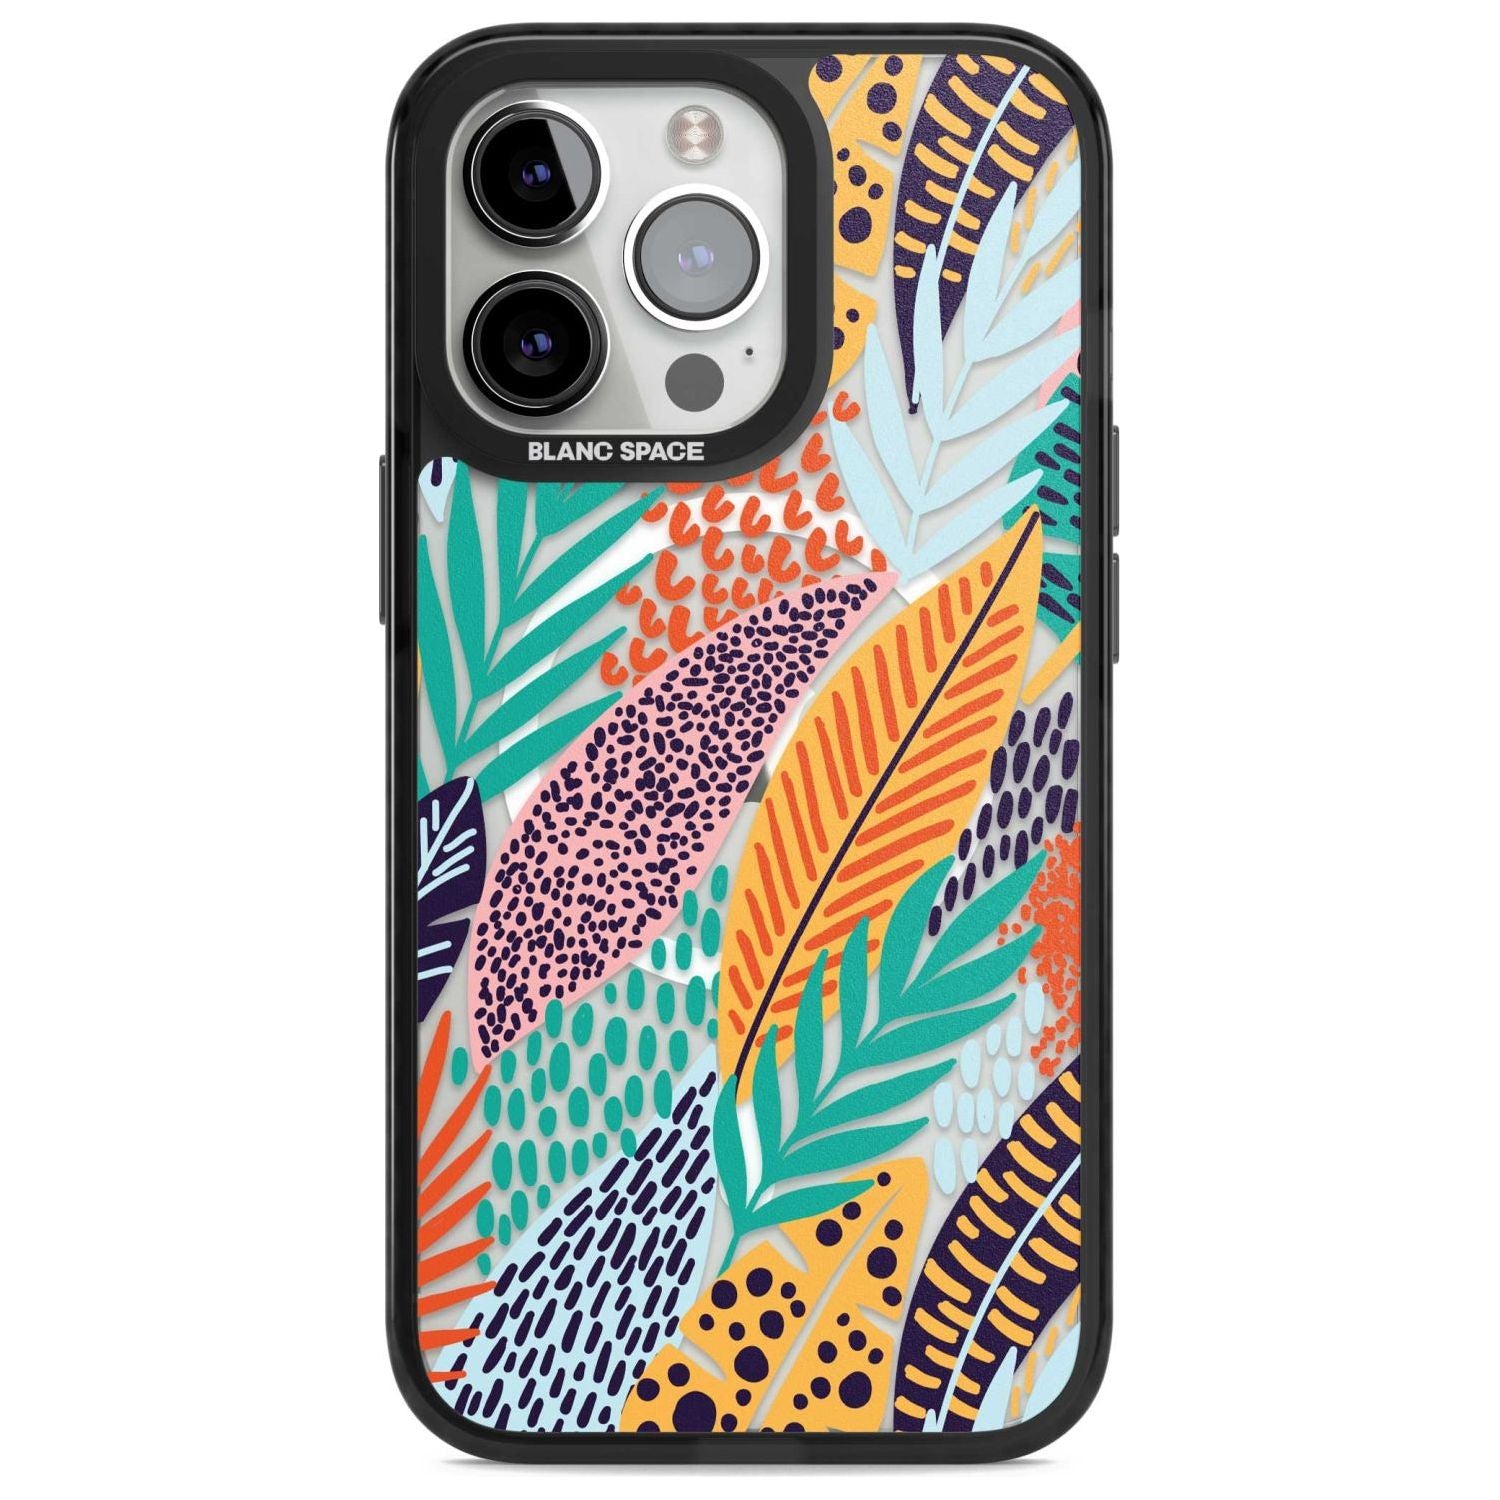 Colourful Leaves Mixture Phone Case iPhone 15 Pro Max / Magsafe Black Impact Case,iPhone 15 Pro / Magsafe Black Impact Case,iPhone 14 Pro Max / Magsafe Black Impact Case,iPhone 14 Pro / Magsafe Black Impact Case,iPhone 13 Pro / Magsafe Black Impact Case Blanc Space